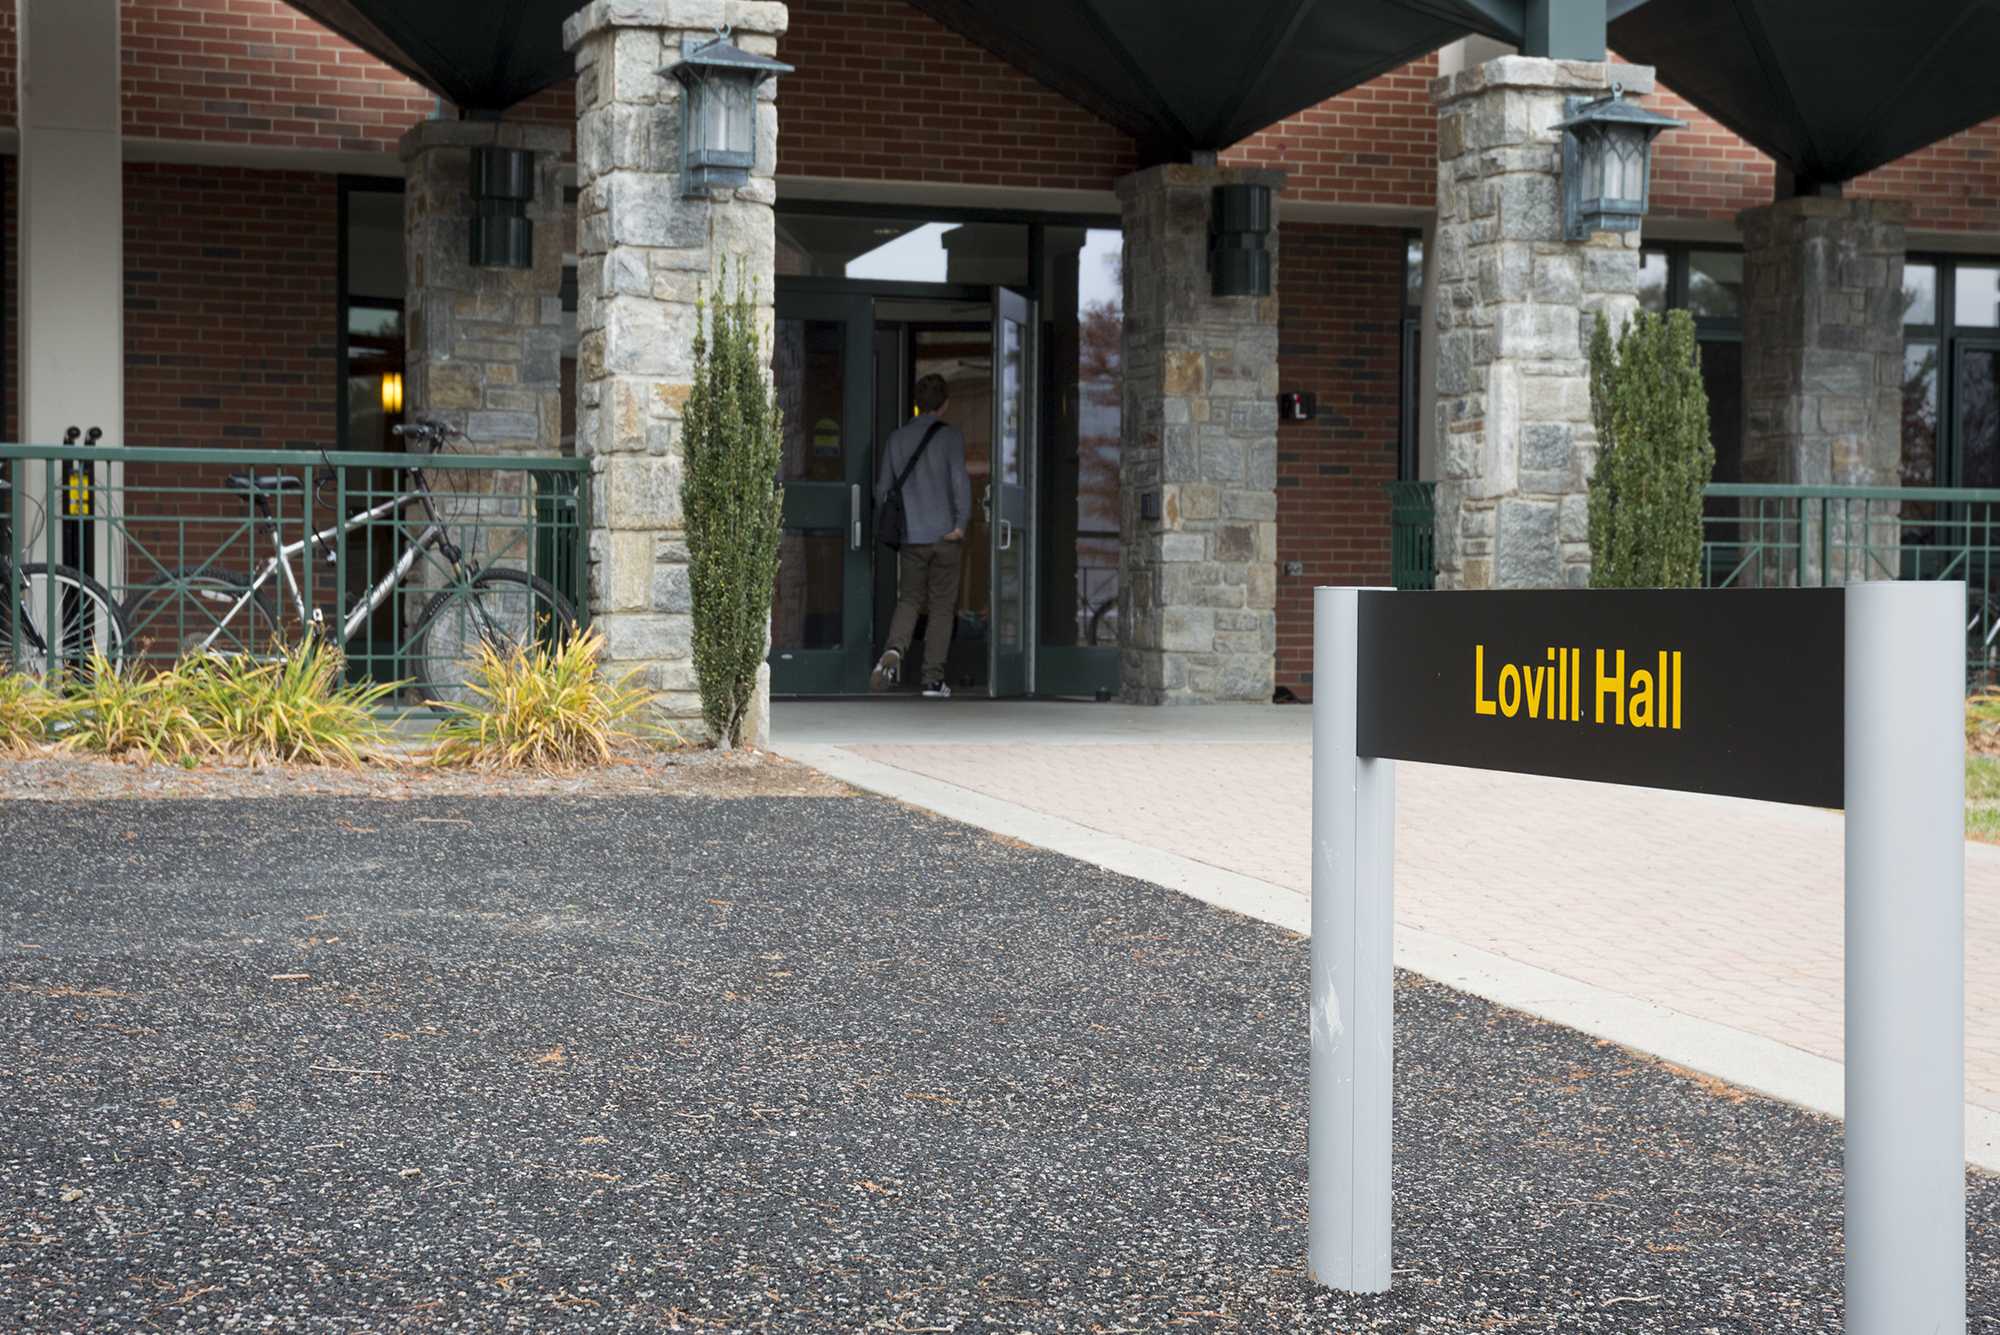 UPDATED: ASU police respond to a death at Lovill residence hall